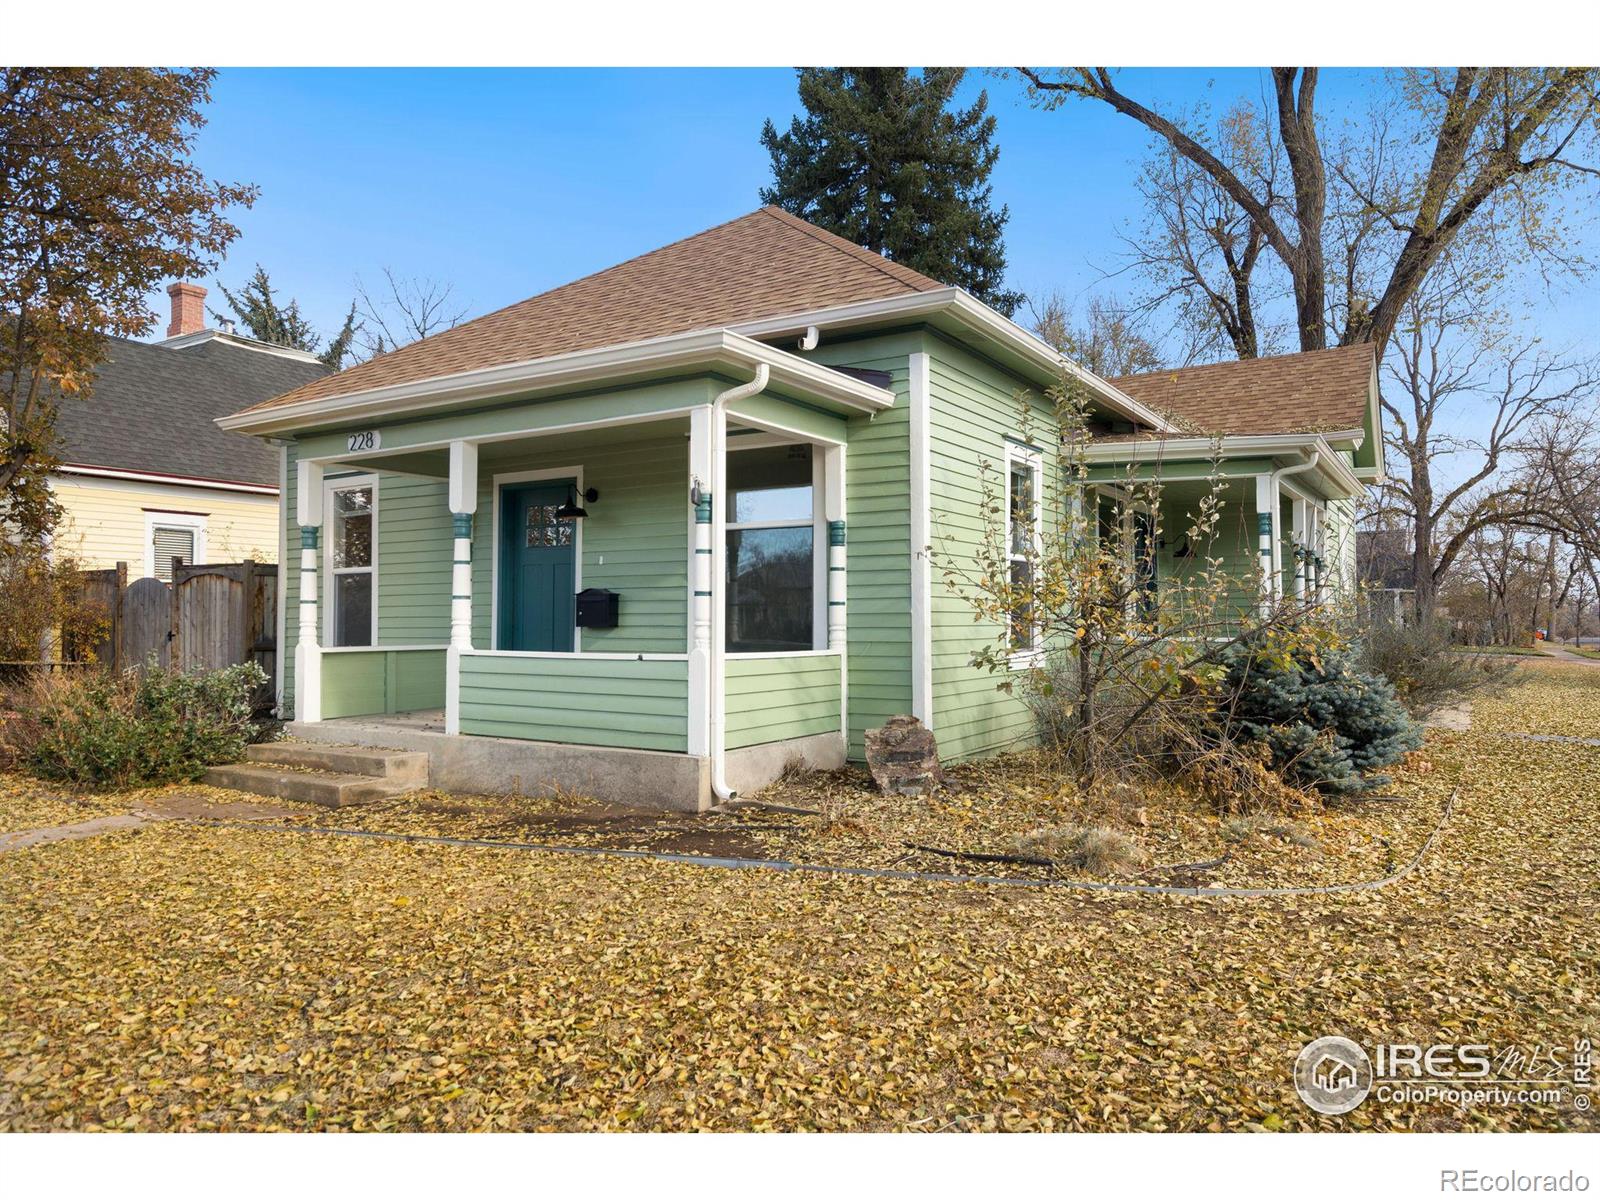 Report Image for 228  Whedbee Street,Fort Collins, Colorado